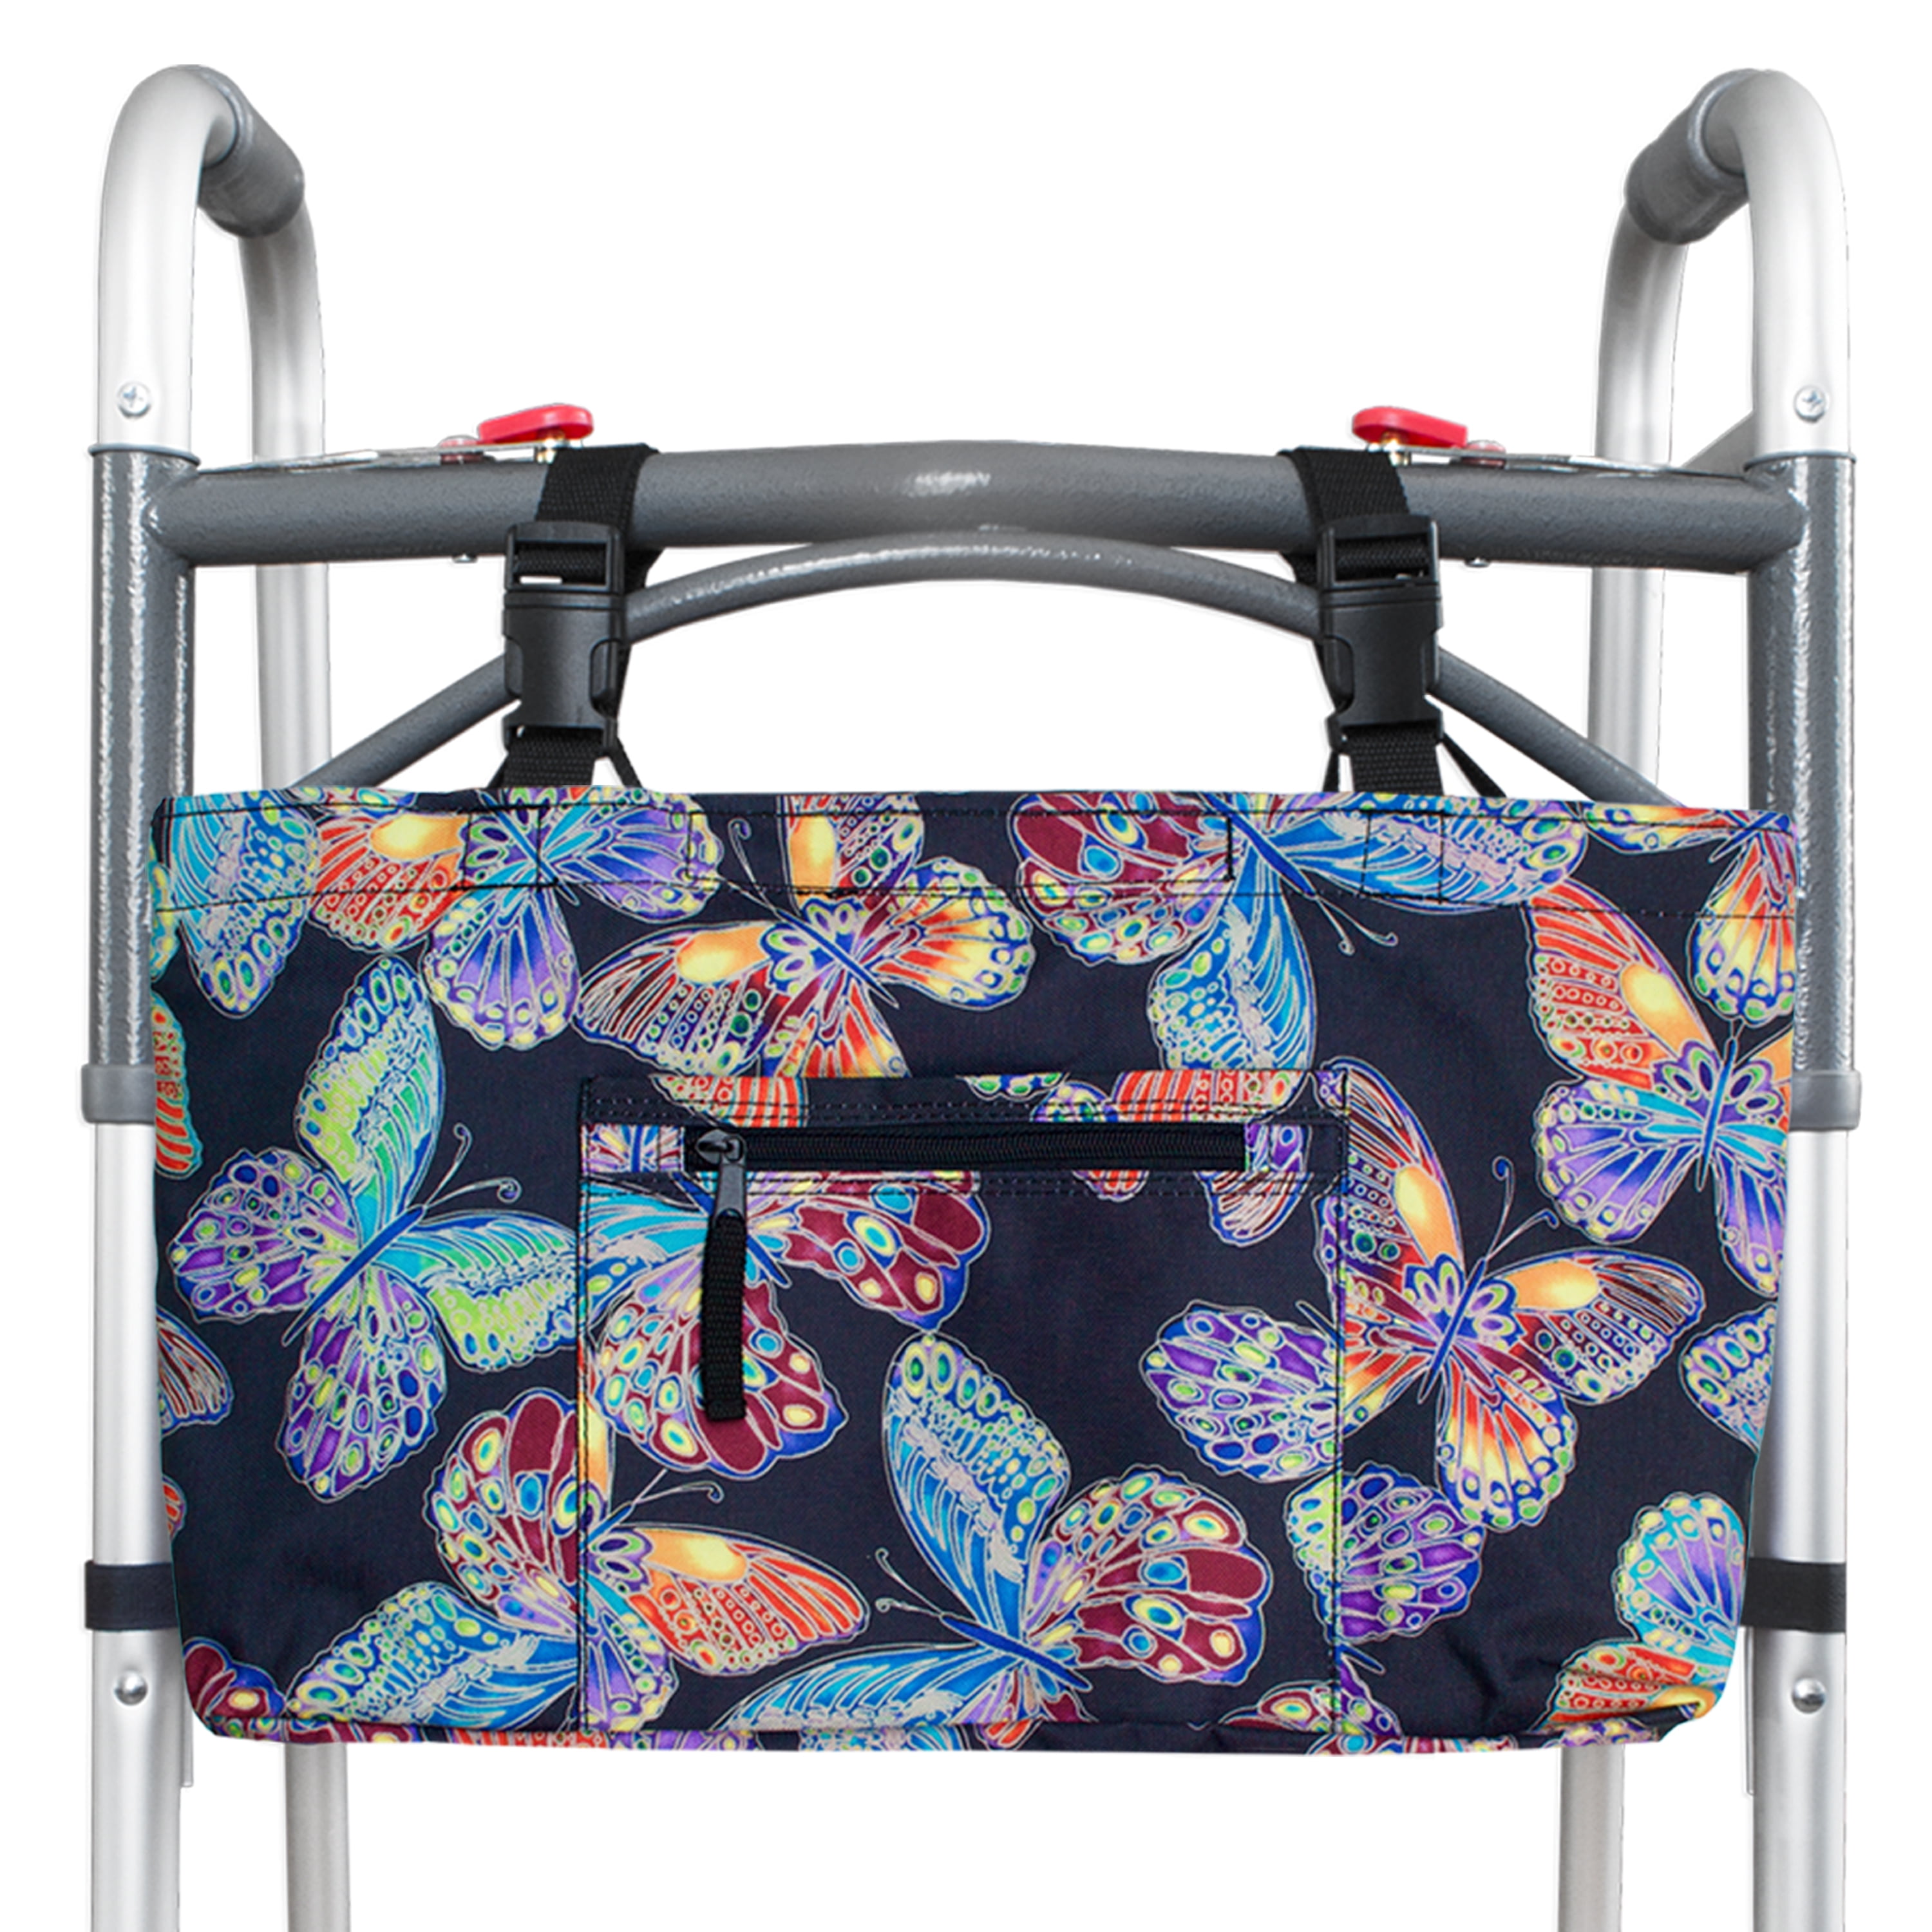 RMS Walker Bag with Soft Cooler - Vivid Butterfly - 0 - 0